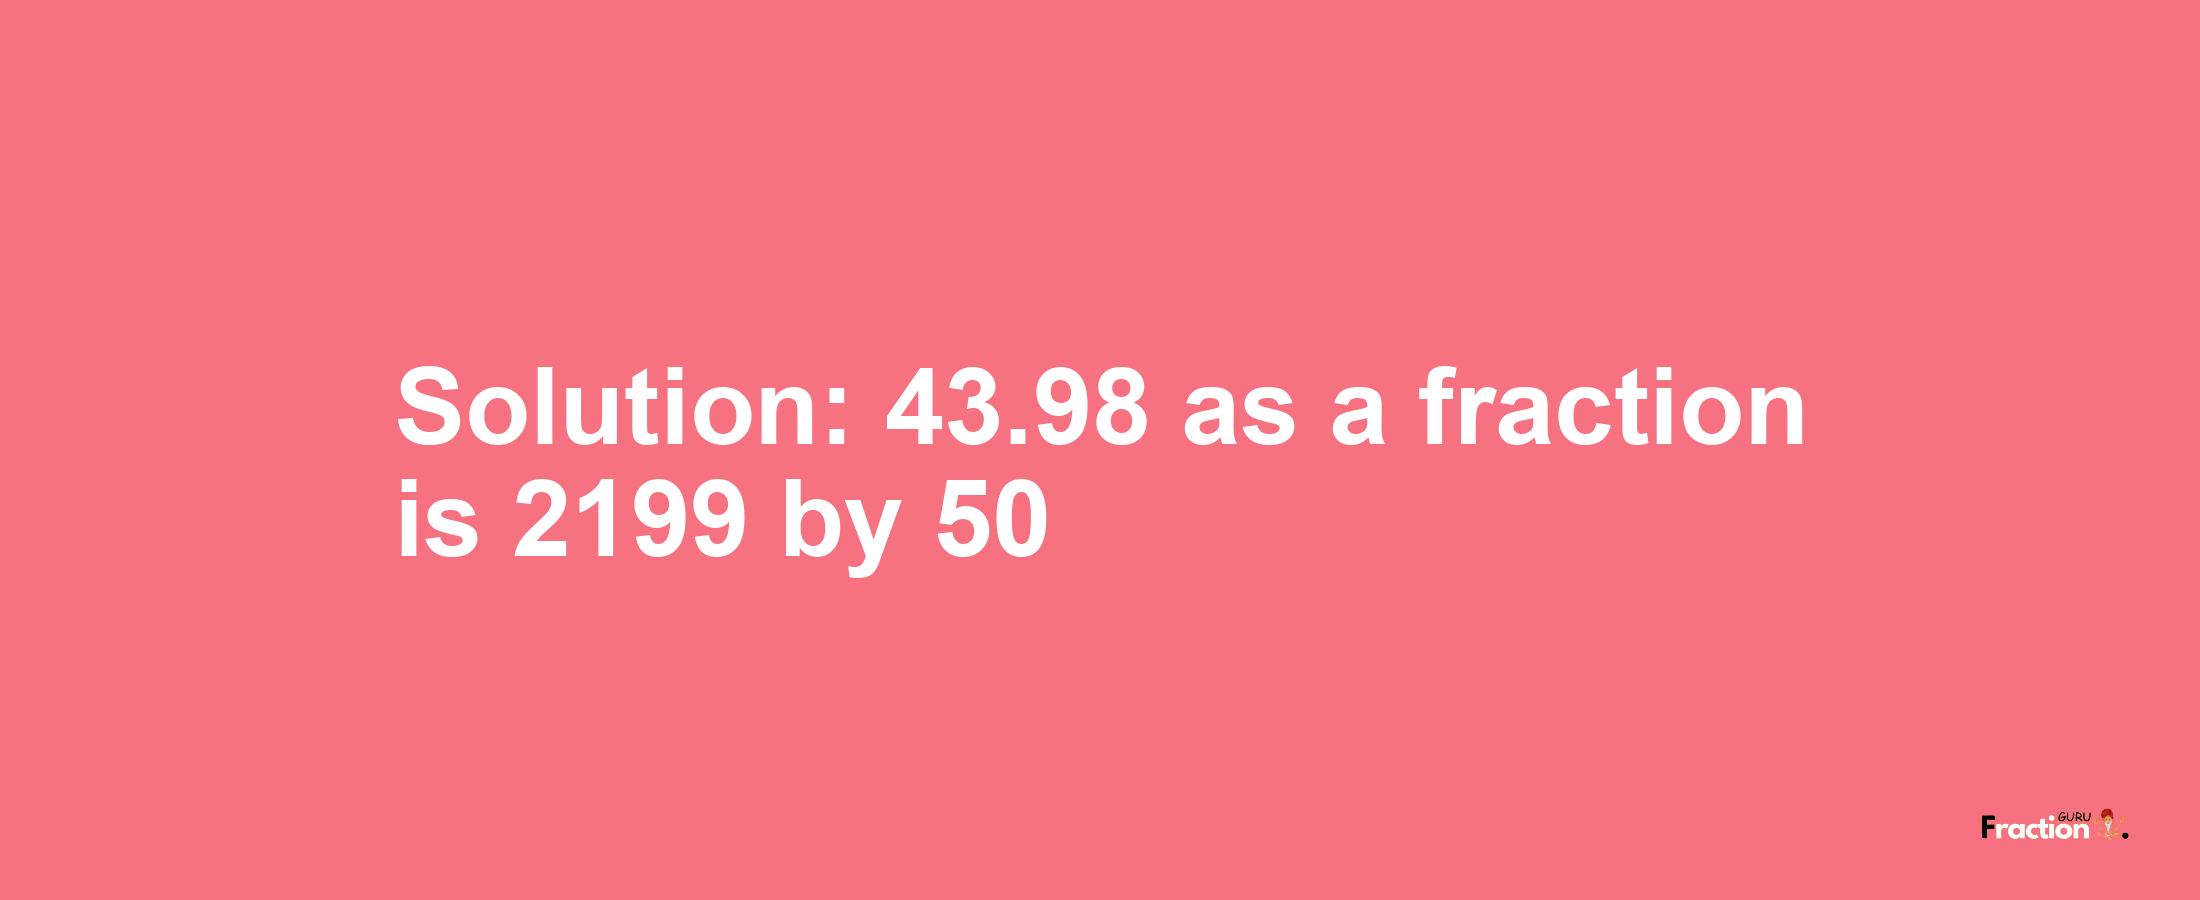 Solution:43.98 as a fraction is 2199/50